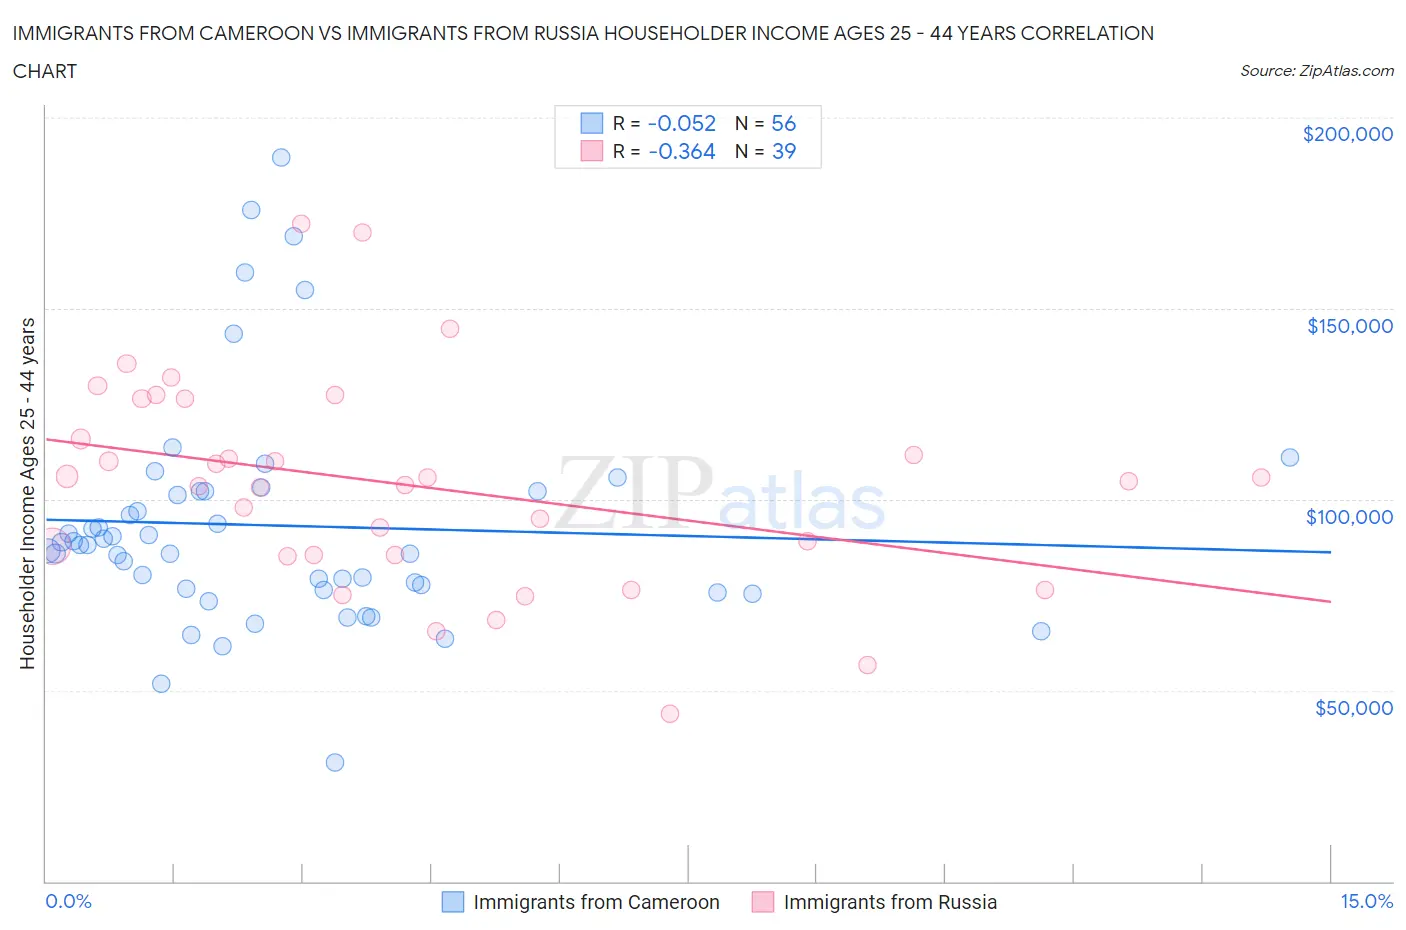 Immigrants from Cameroon vs Immigrants from Russia Householder Income Ages 25 - 44 years